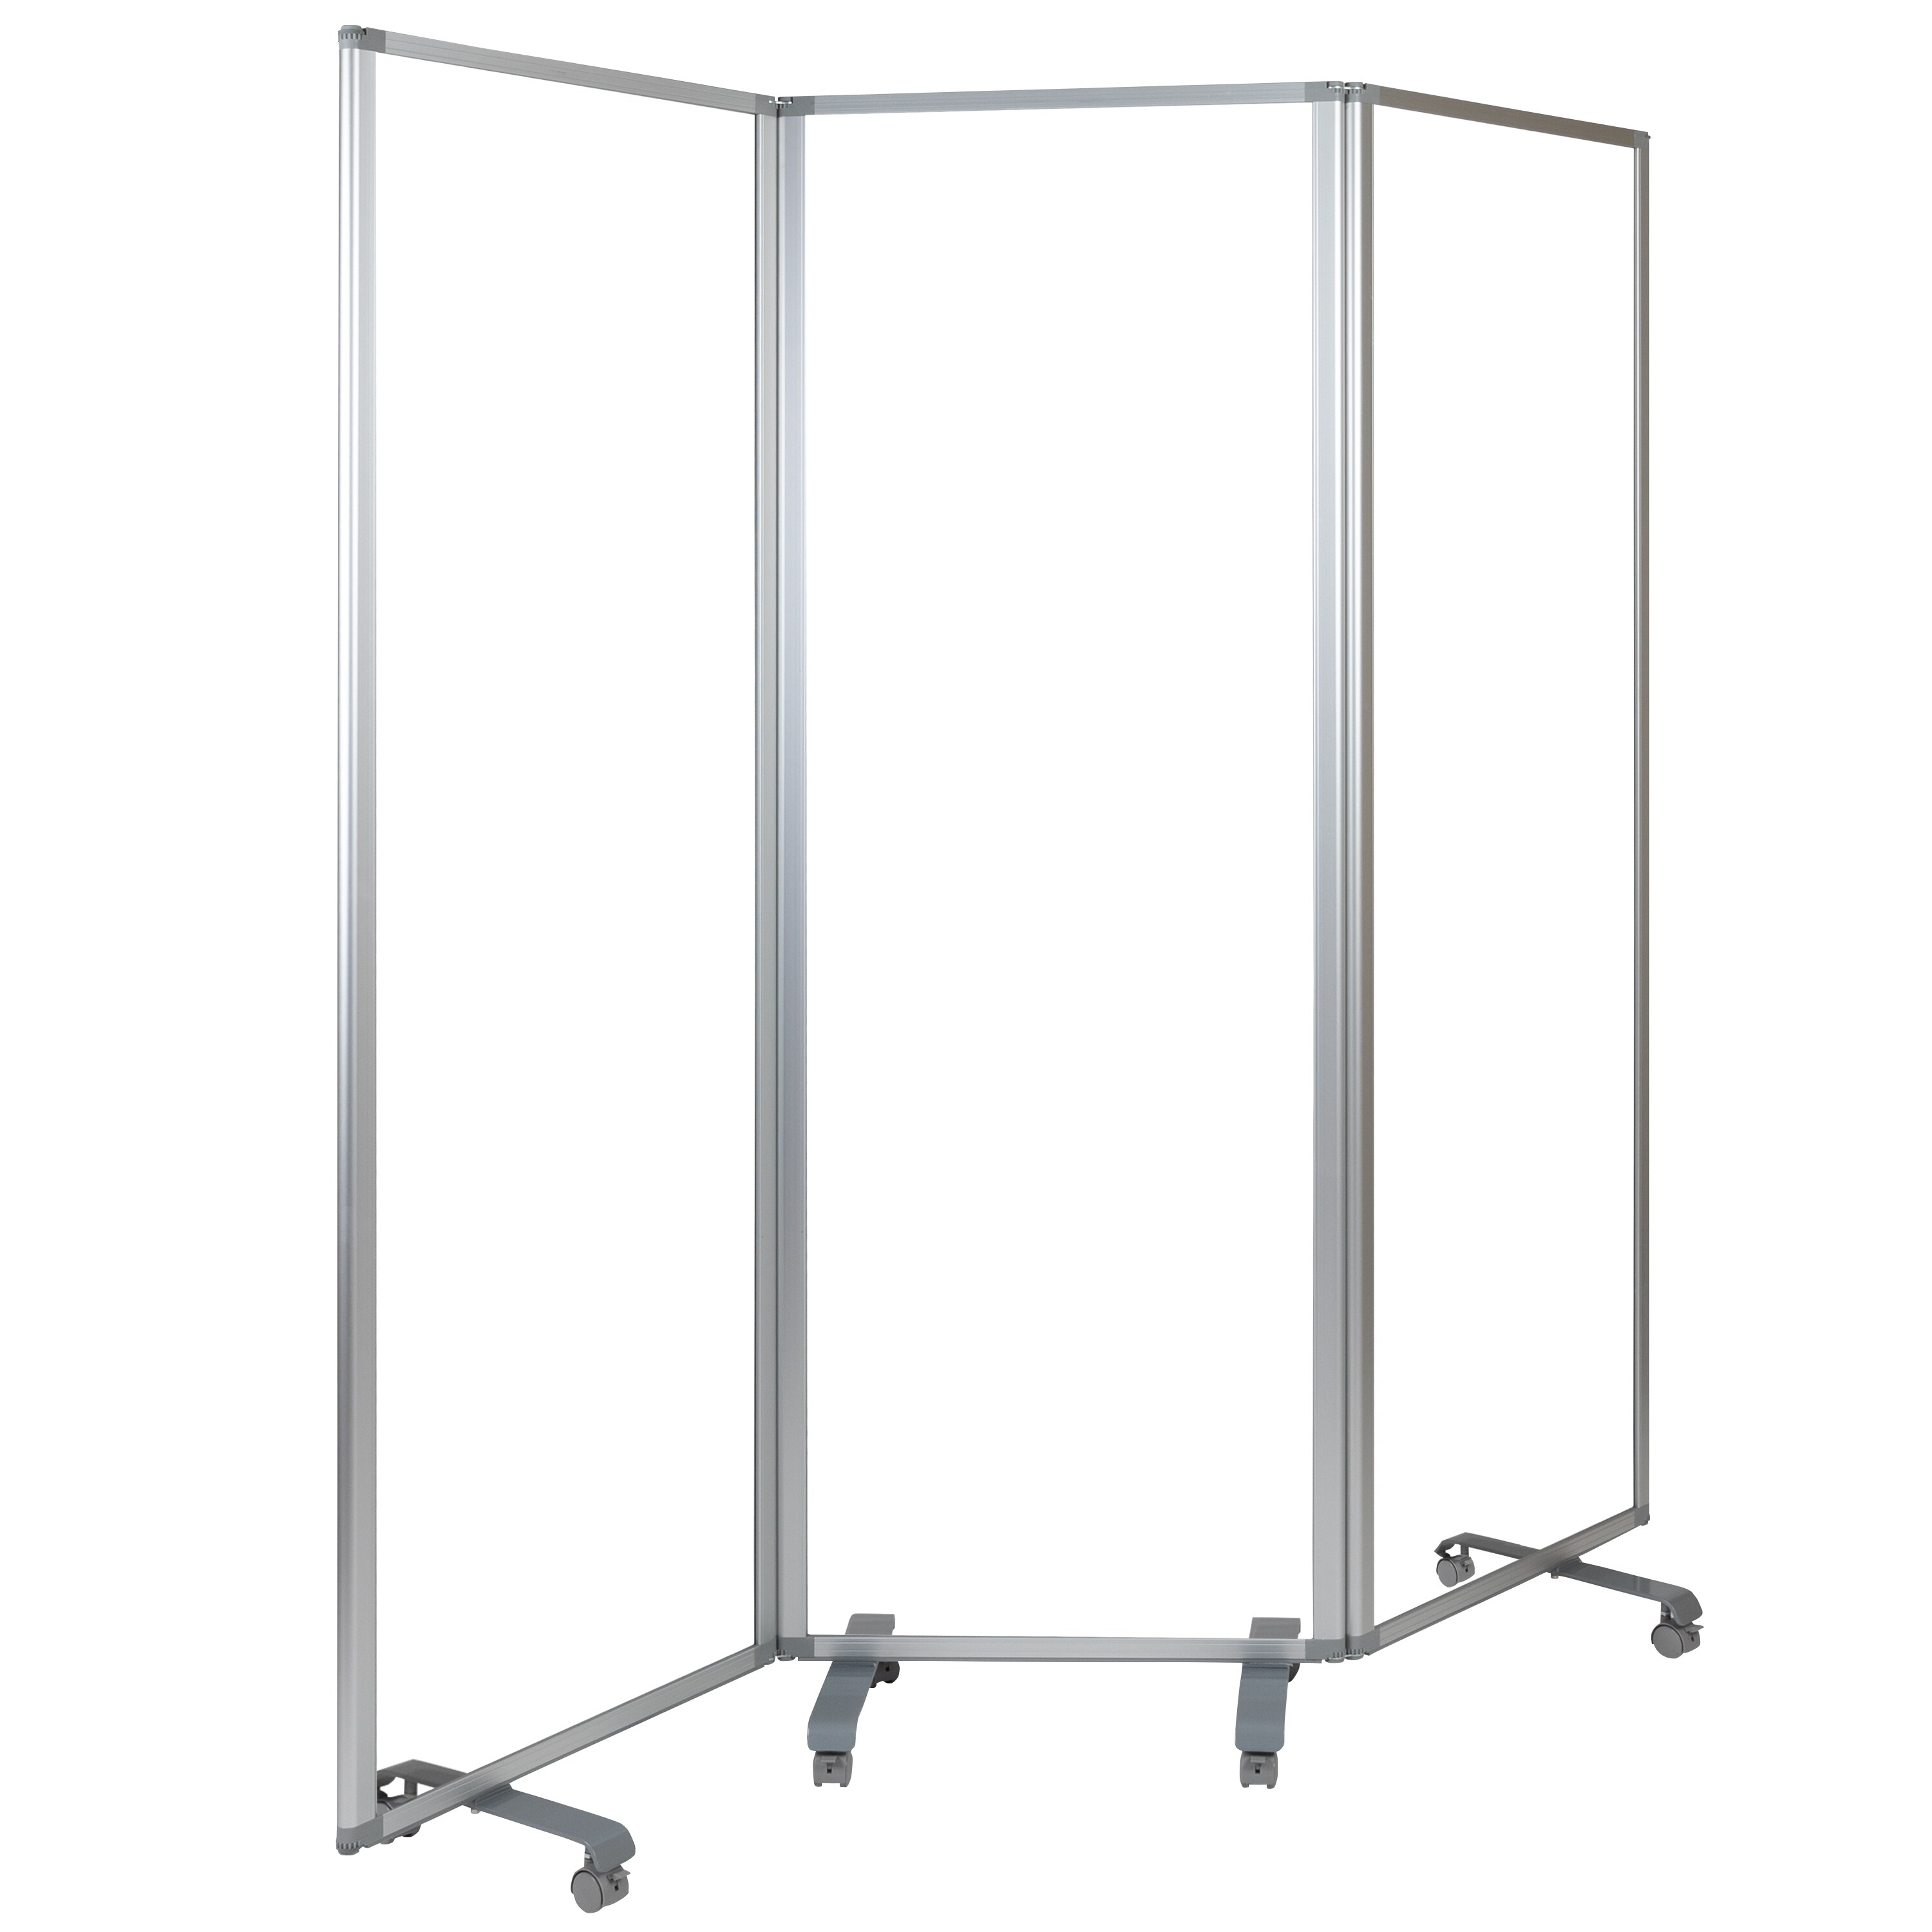 FDP-12793 Clear 3/16 Clear Acrylic Mobile Room Divider with